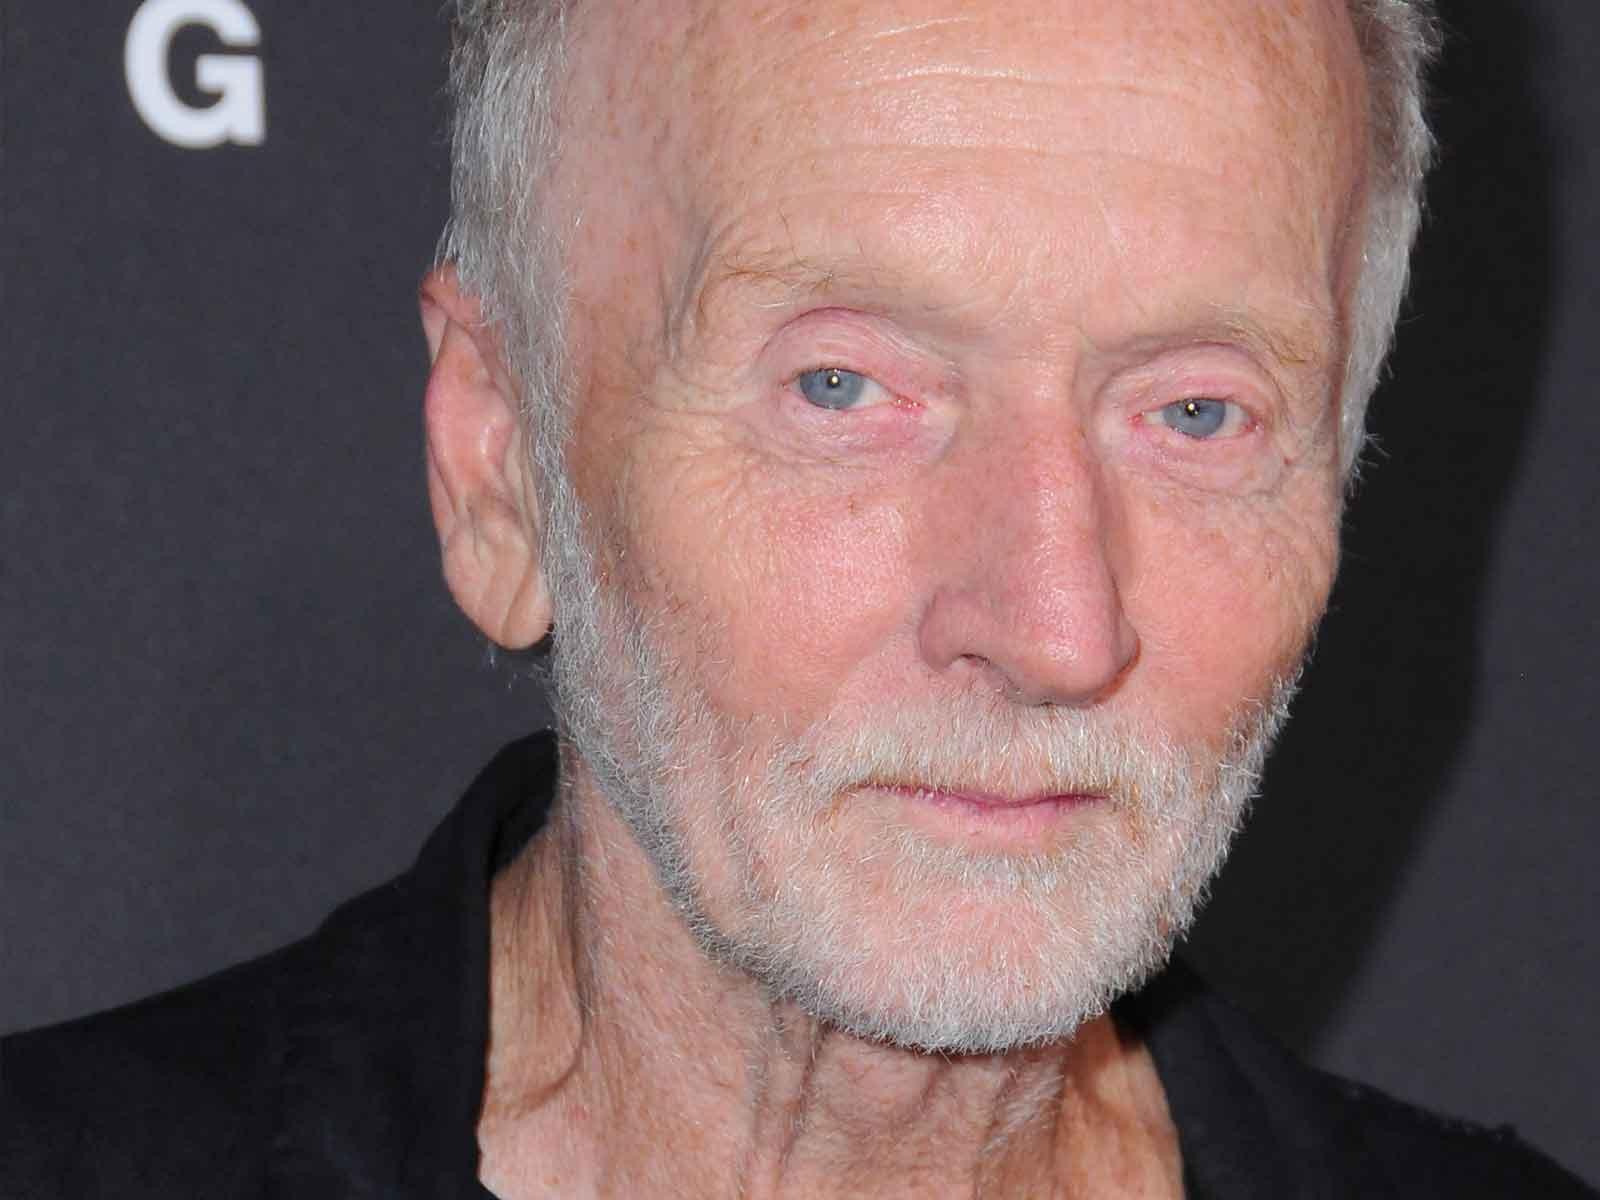 ‘Saw’ Star Tobin Bell’s Wife Files for Divorce